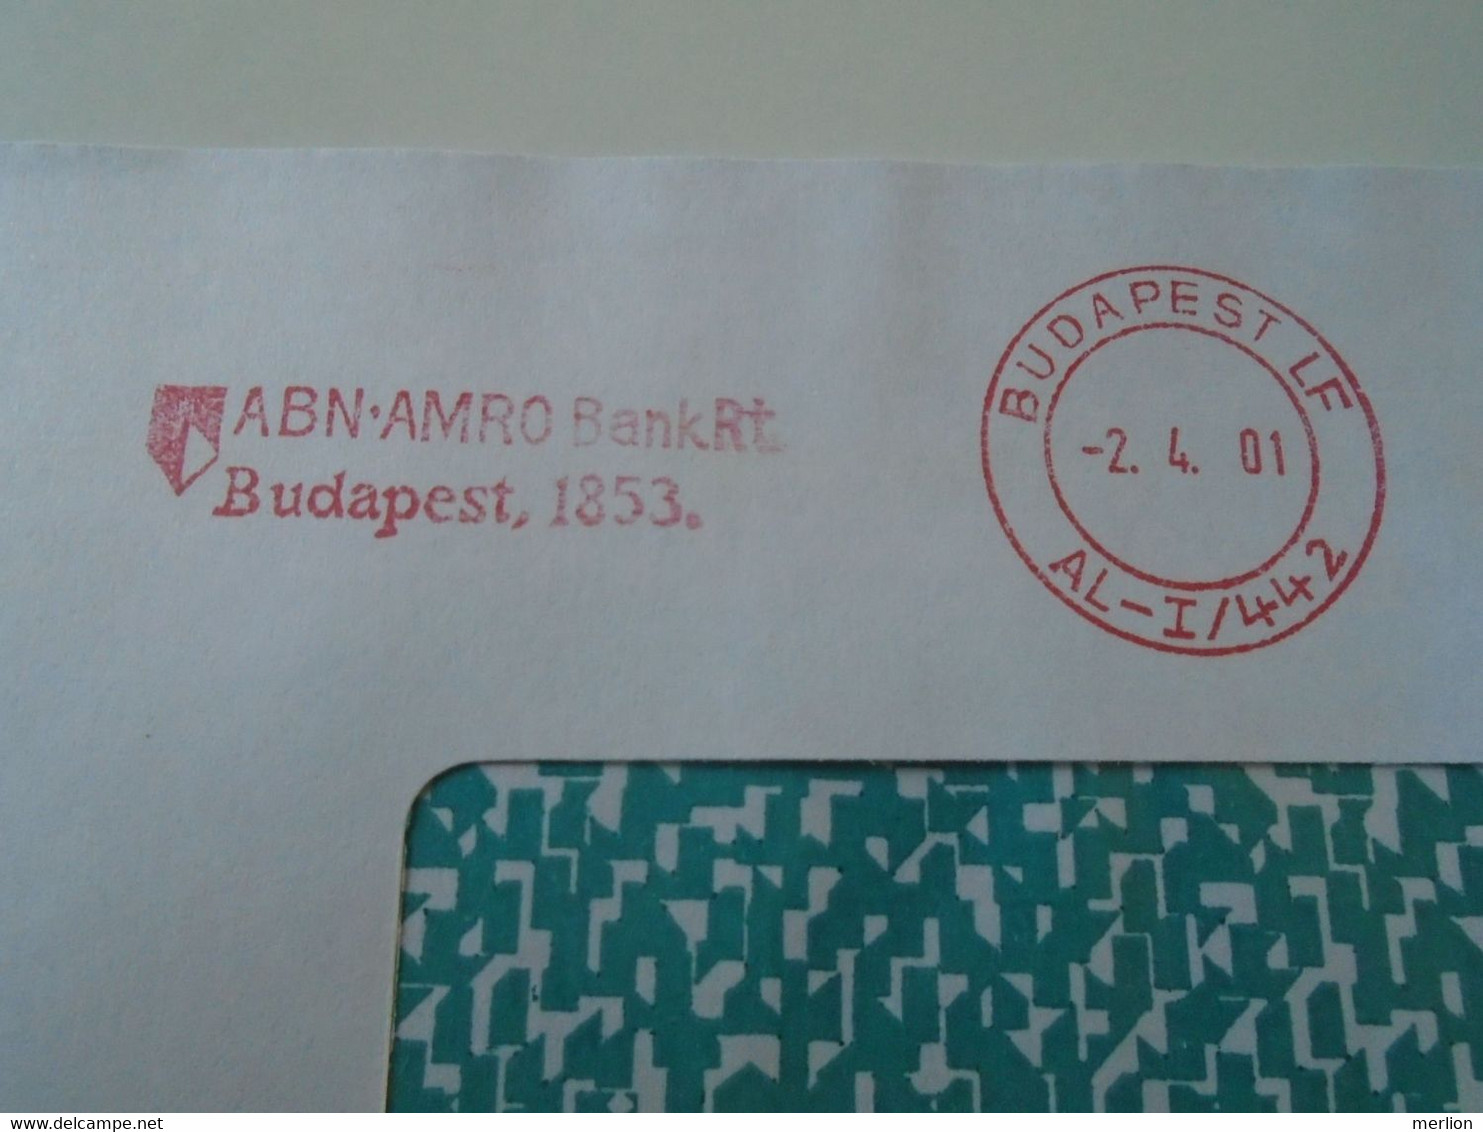 AD00012.118  Hungary Cover  -EMA Red Meter Freistempel-   2001   Budapest  ABN AMRO  Bank - Automaatzegels [ATM]